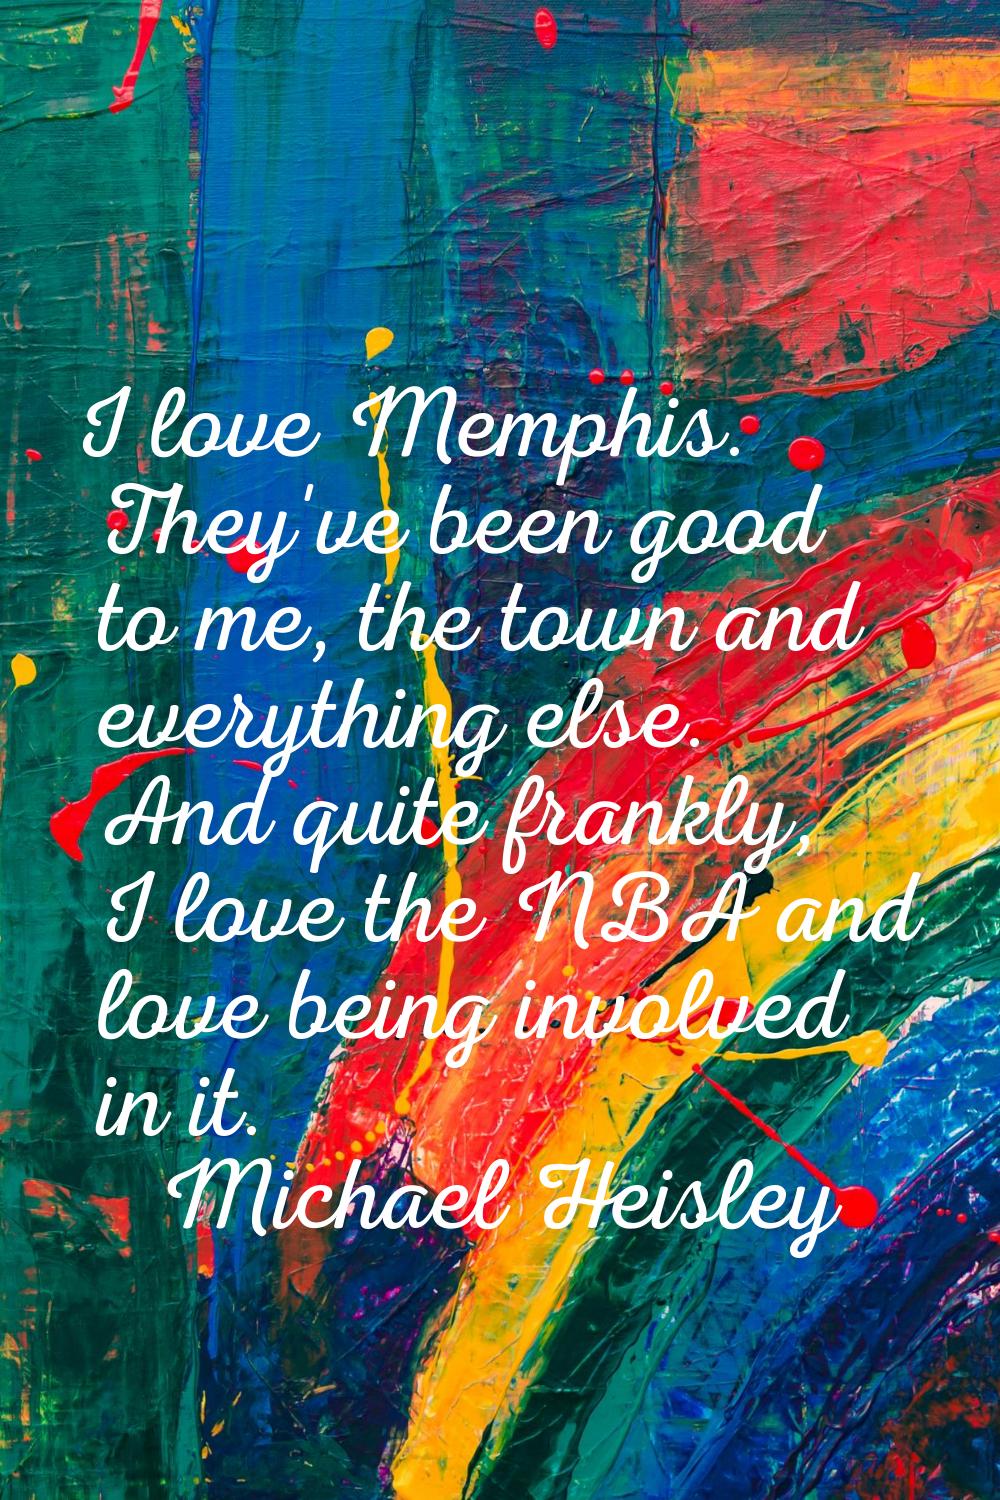 I love Memphis. They've been good to me, the town and everything else. And quite frankly, I love th